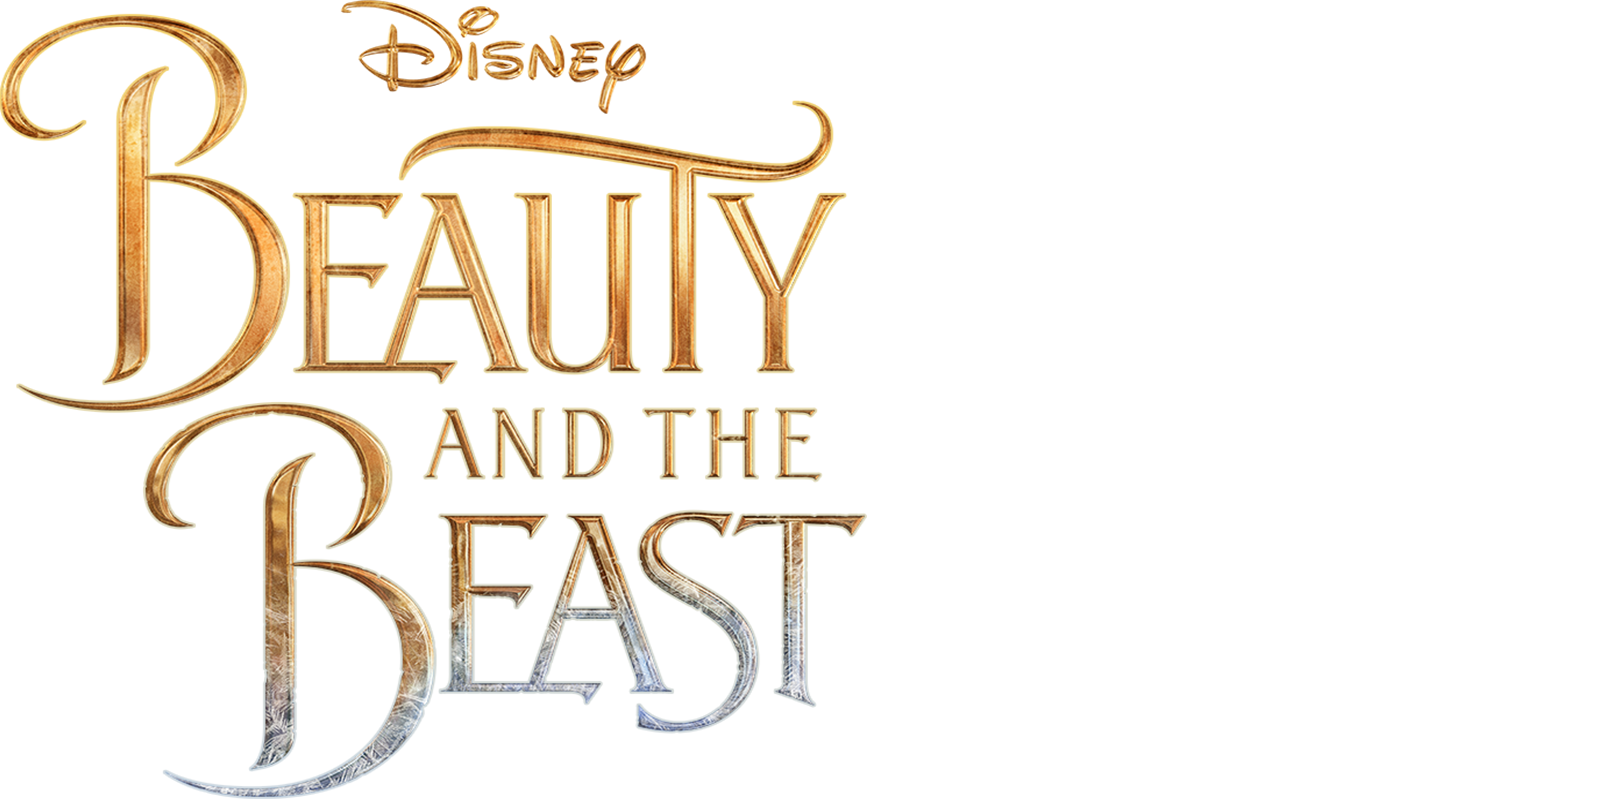 beauty and the beast 2017 full movie share